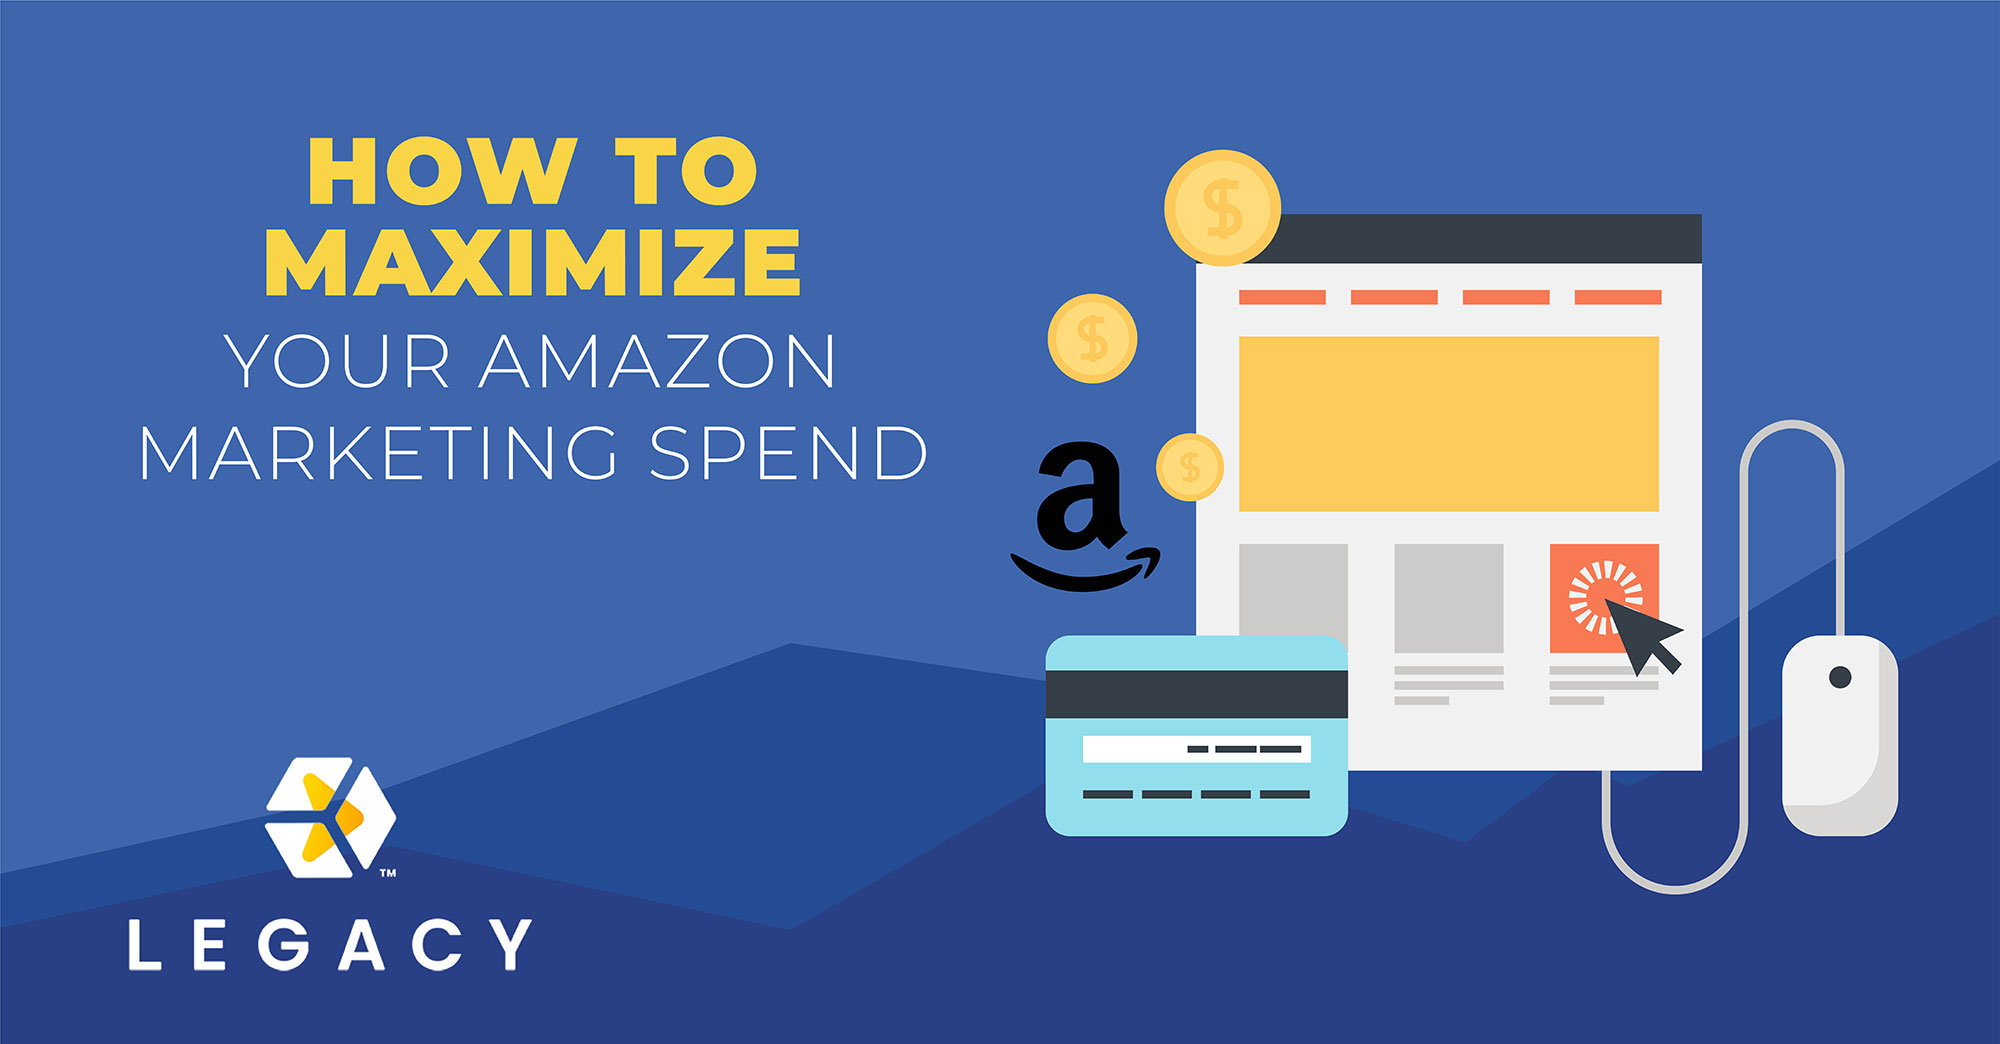 How to Maximize Your Amazon Marketing Spend